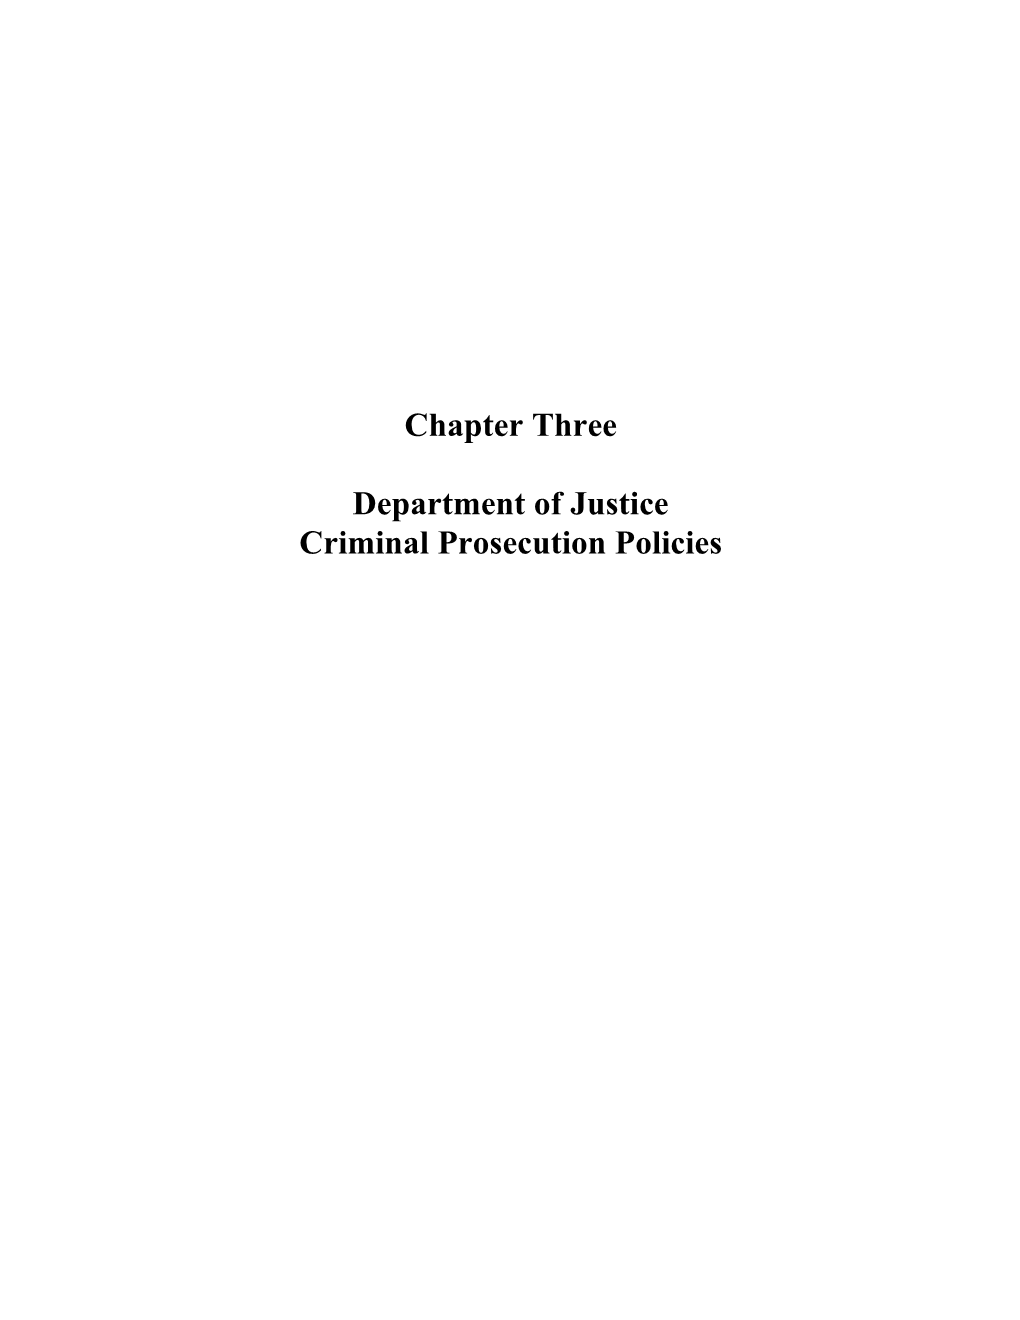 Chapter Three Department of Justice Criminal Prosecution Policies